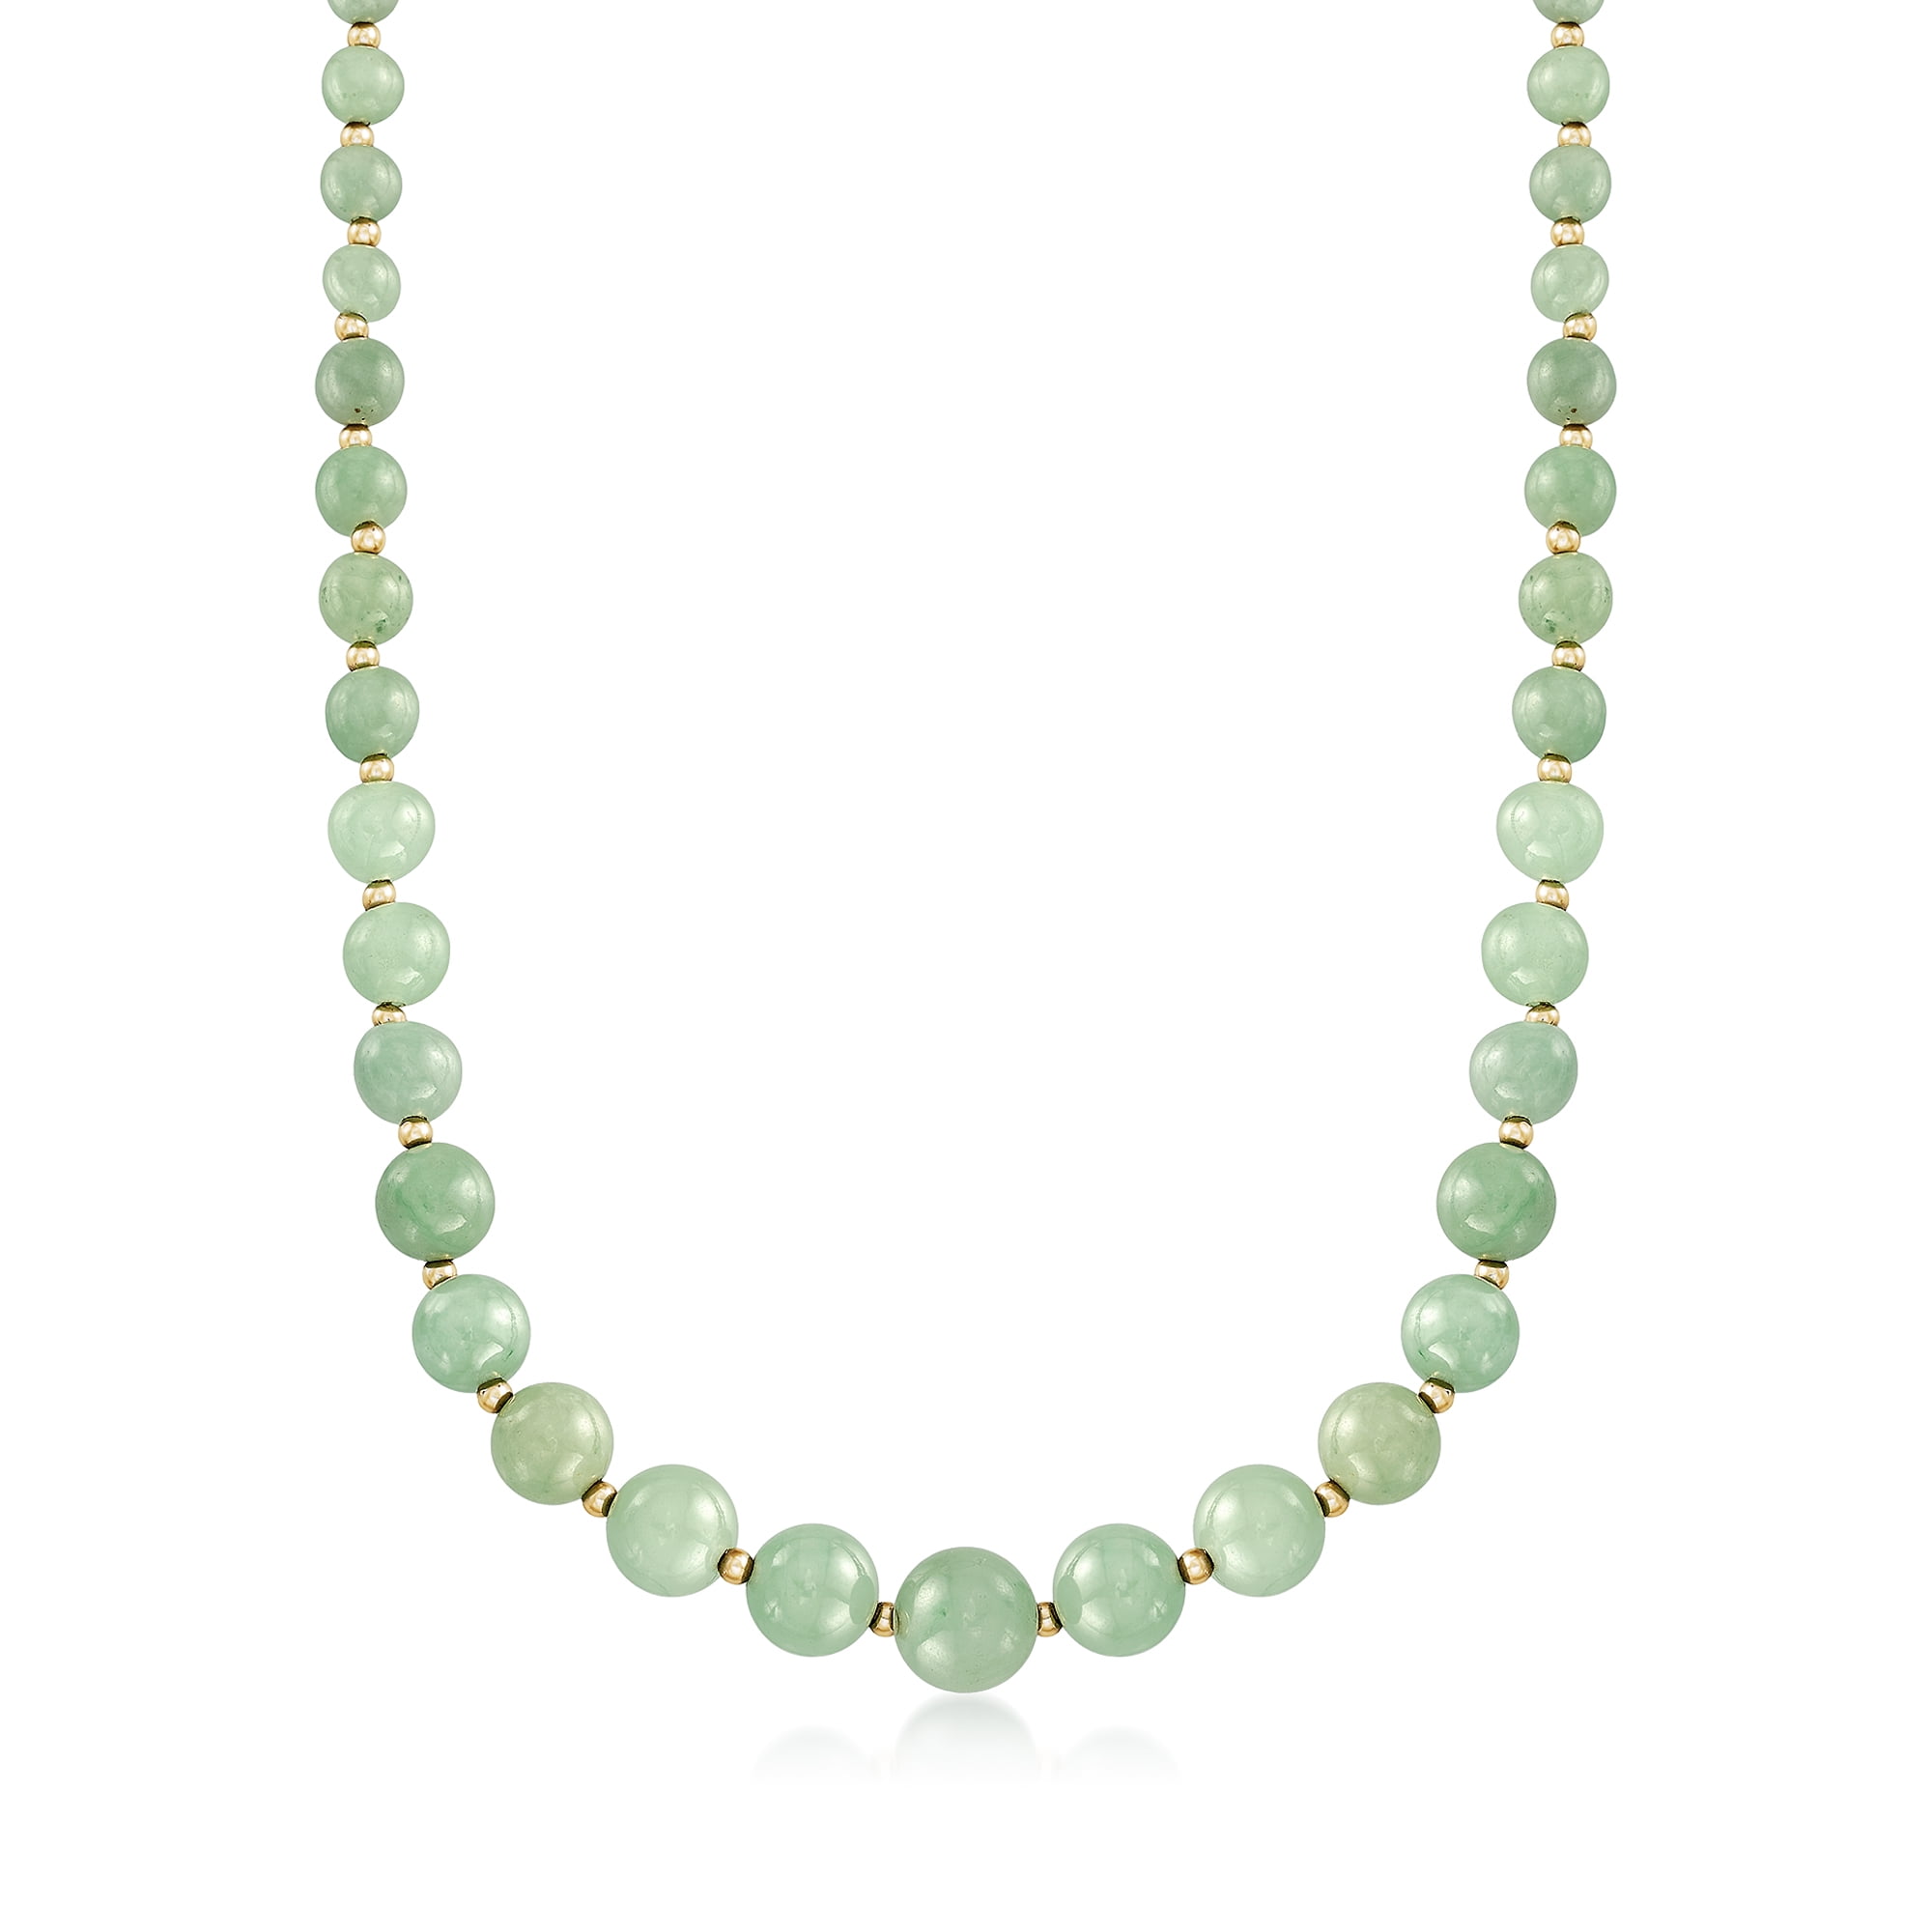 100% Natural Jade Beads, 6-8-10 mm Smooth Jade Bead Necklace, Gift For